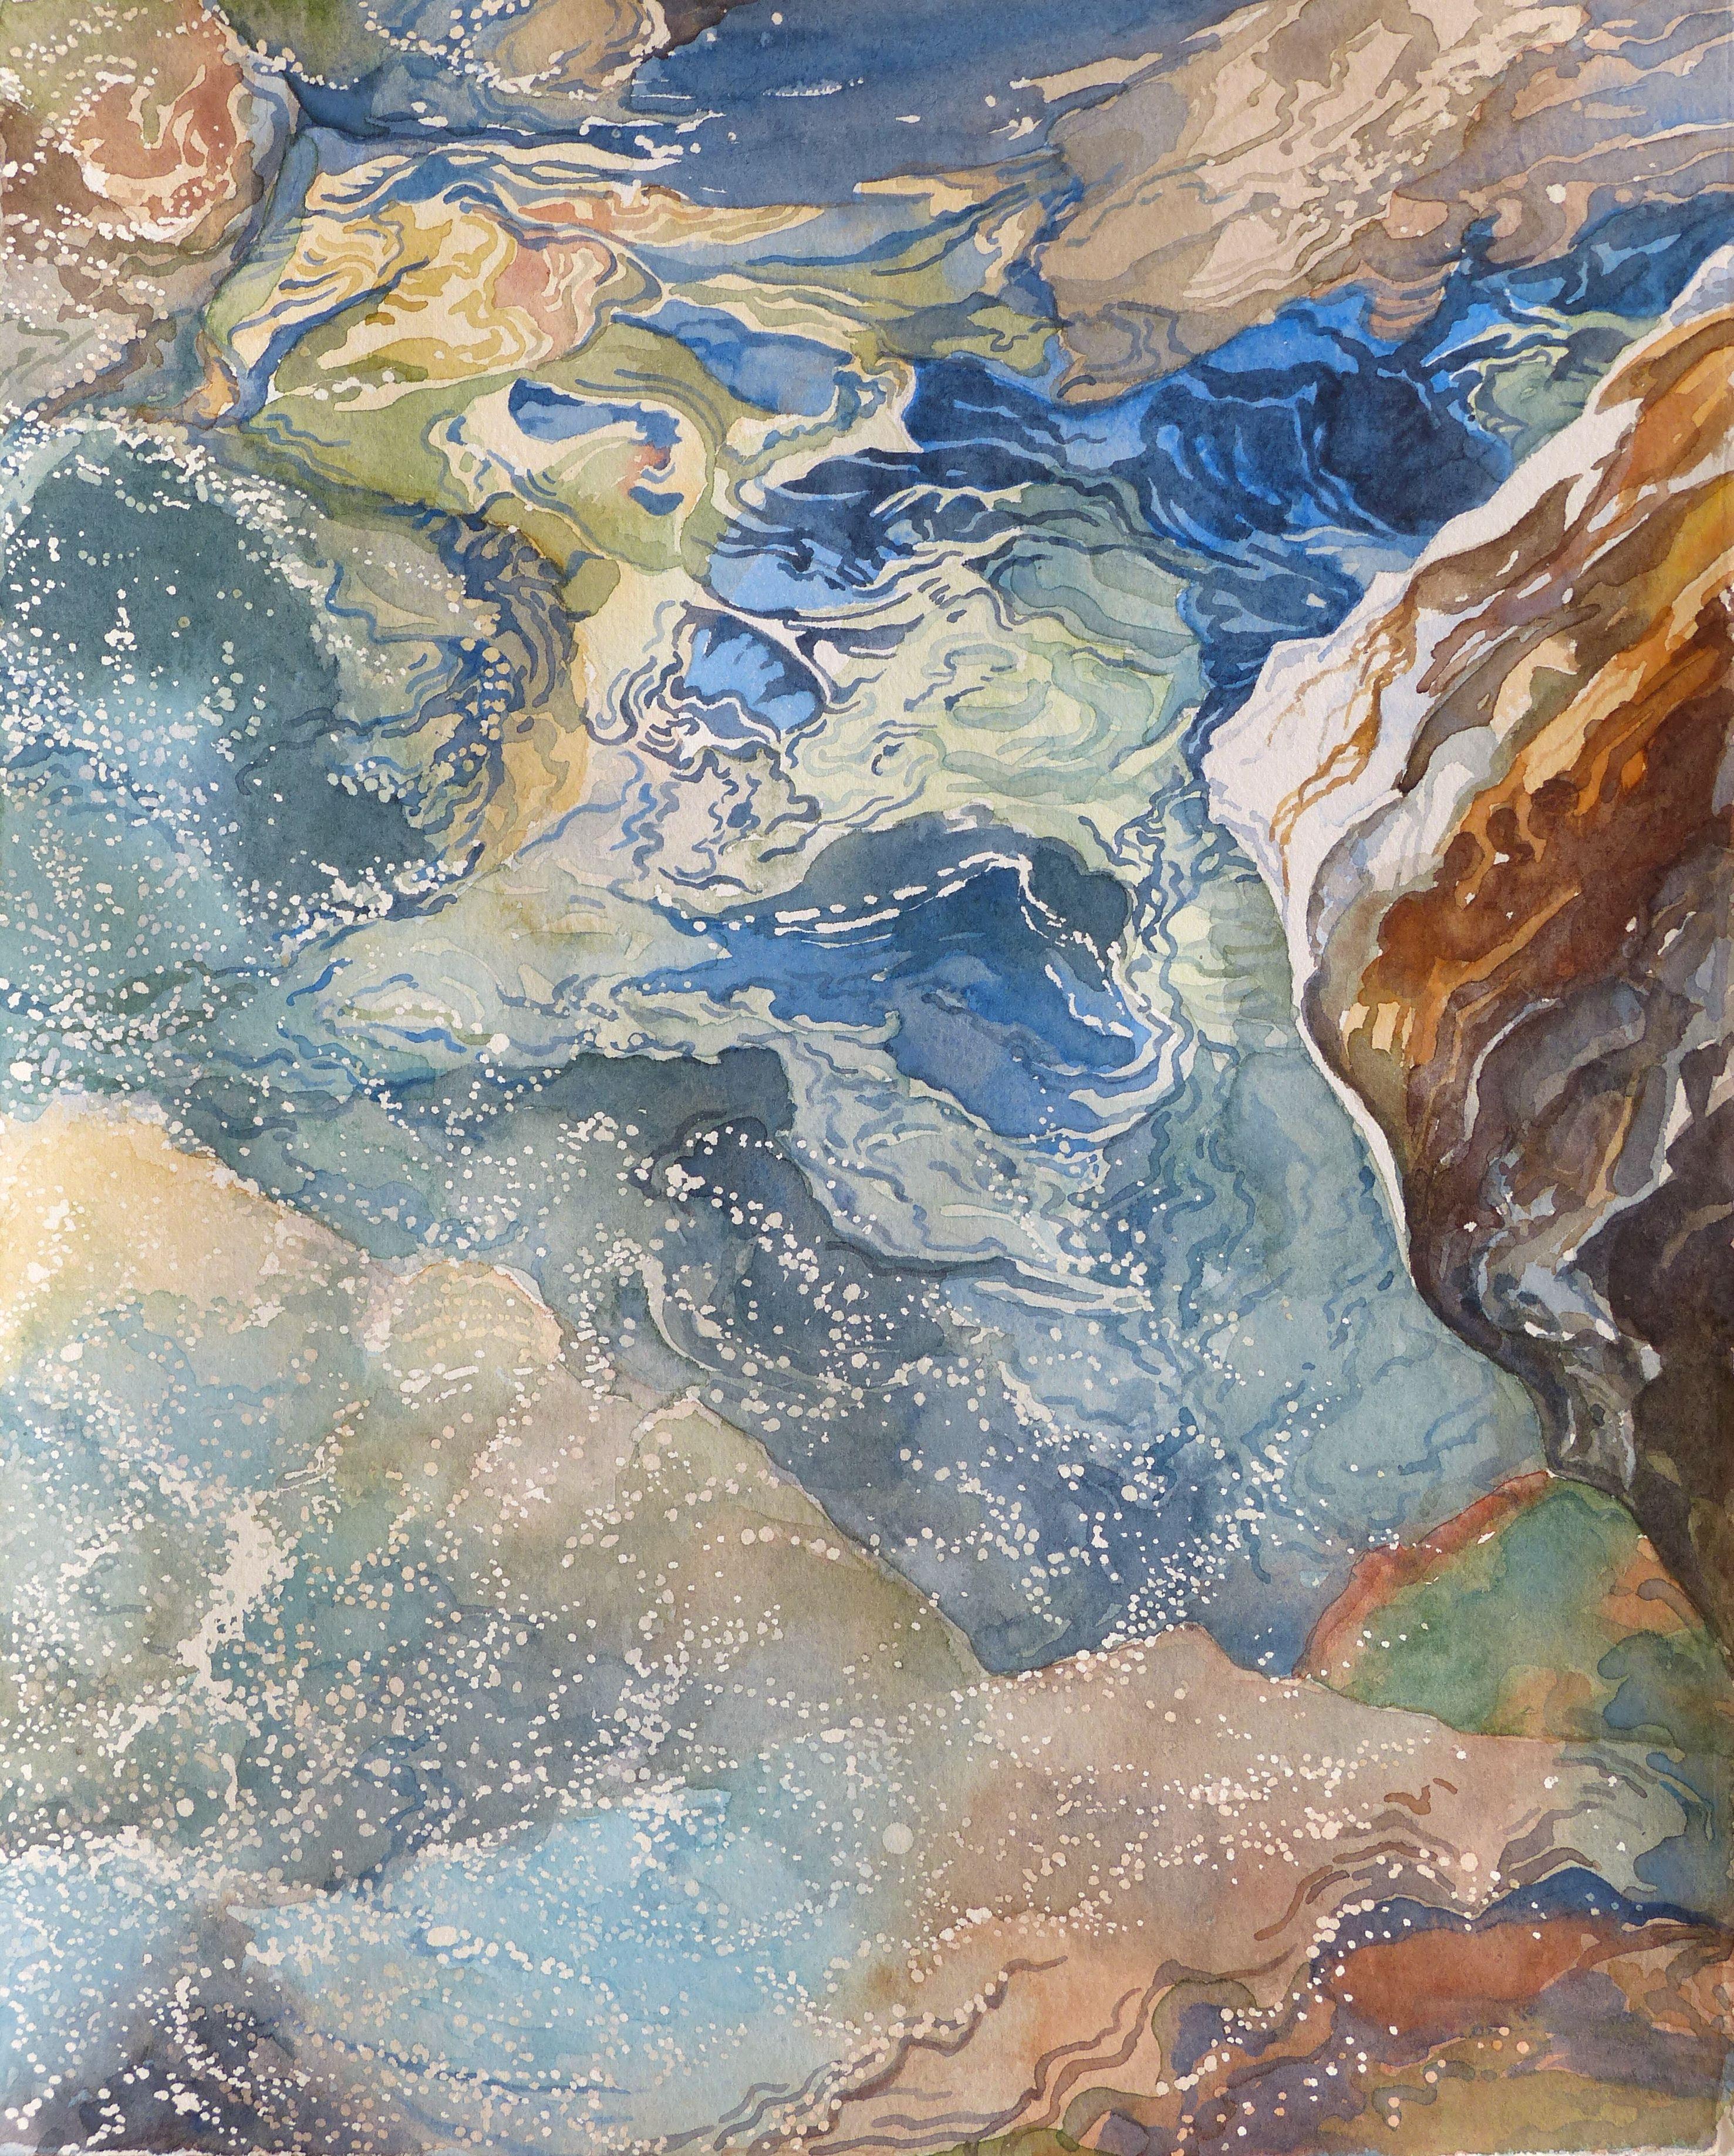 Sparkling Creek, Painting, Watercolor on Watercolor Paper - Art by Leslie White